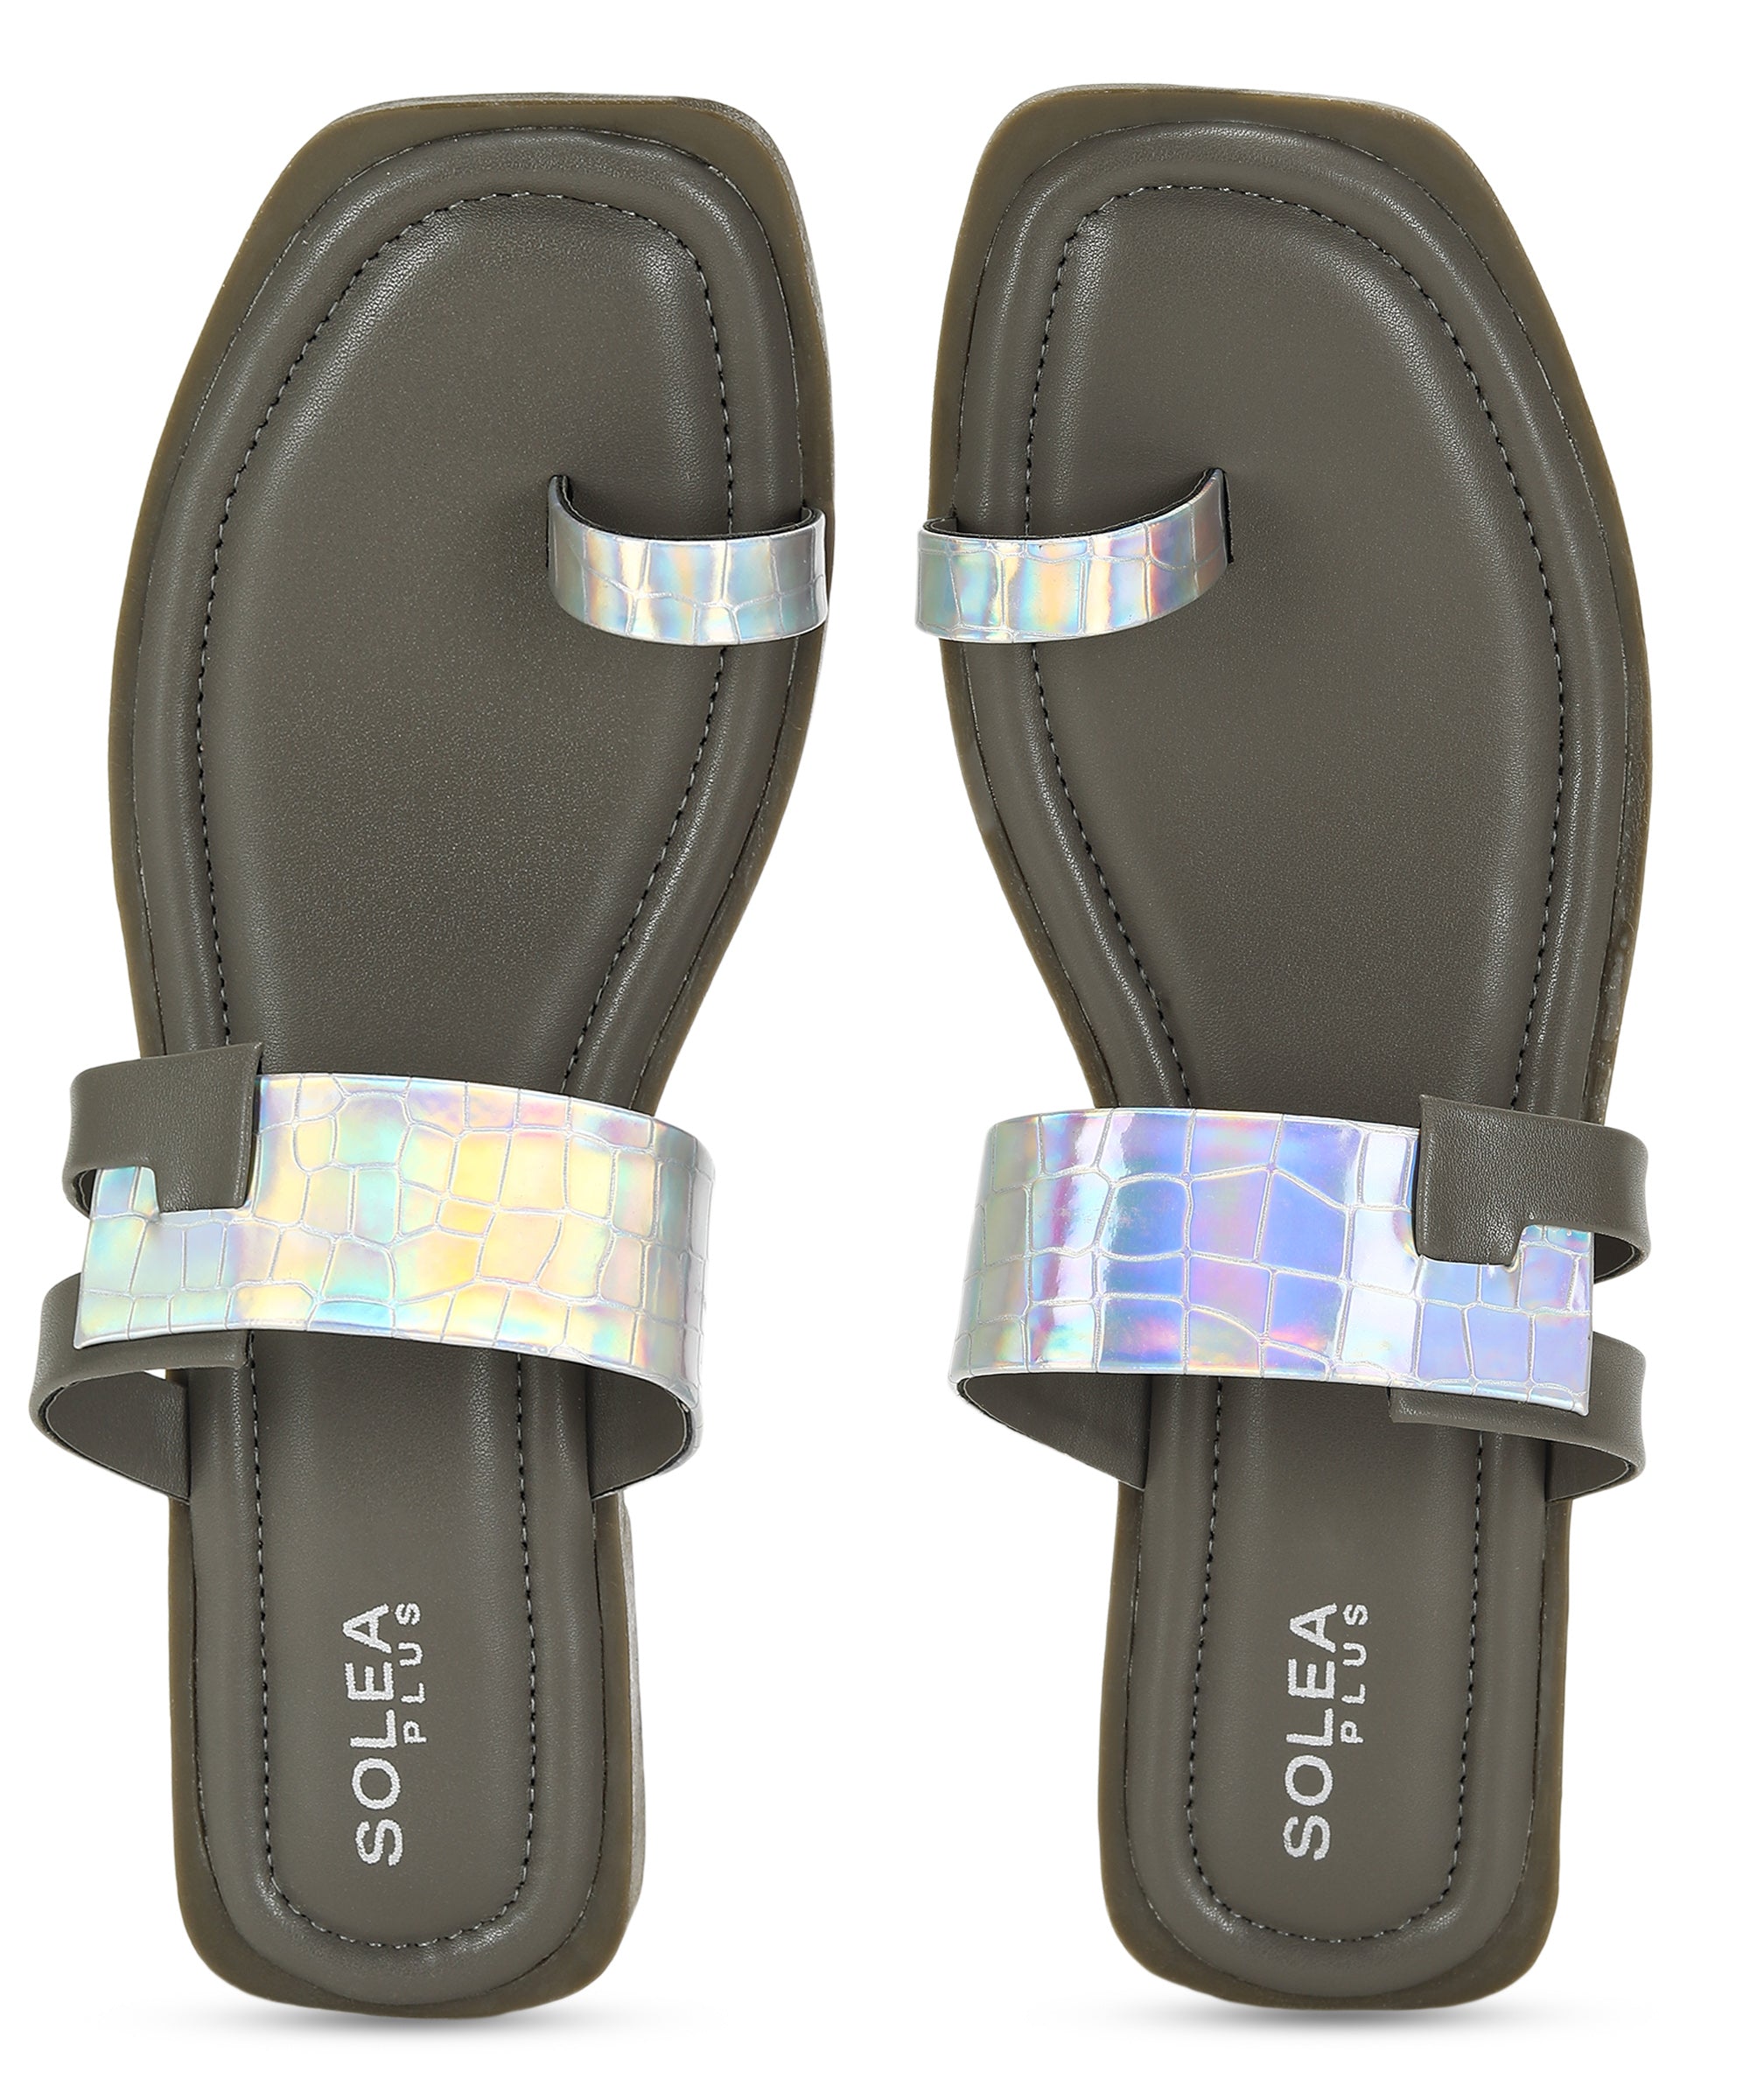 Paragon RK6025L Women Sandals | Casual &amp; Formal Sandals | Stylish, Comfortable &amp; Durable | For Daily &amp; Occasion Wear